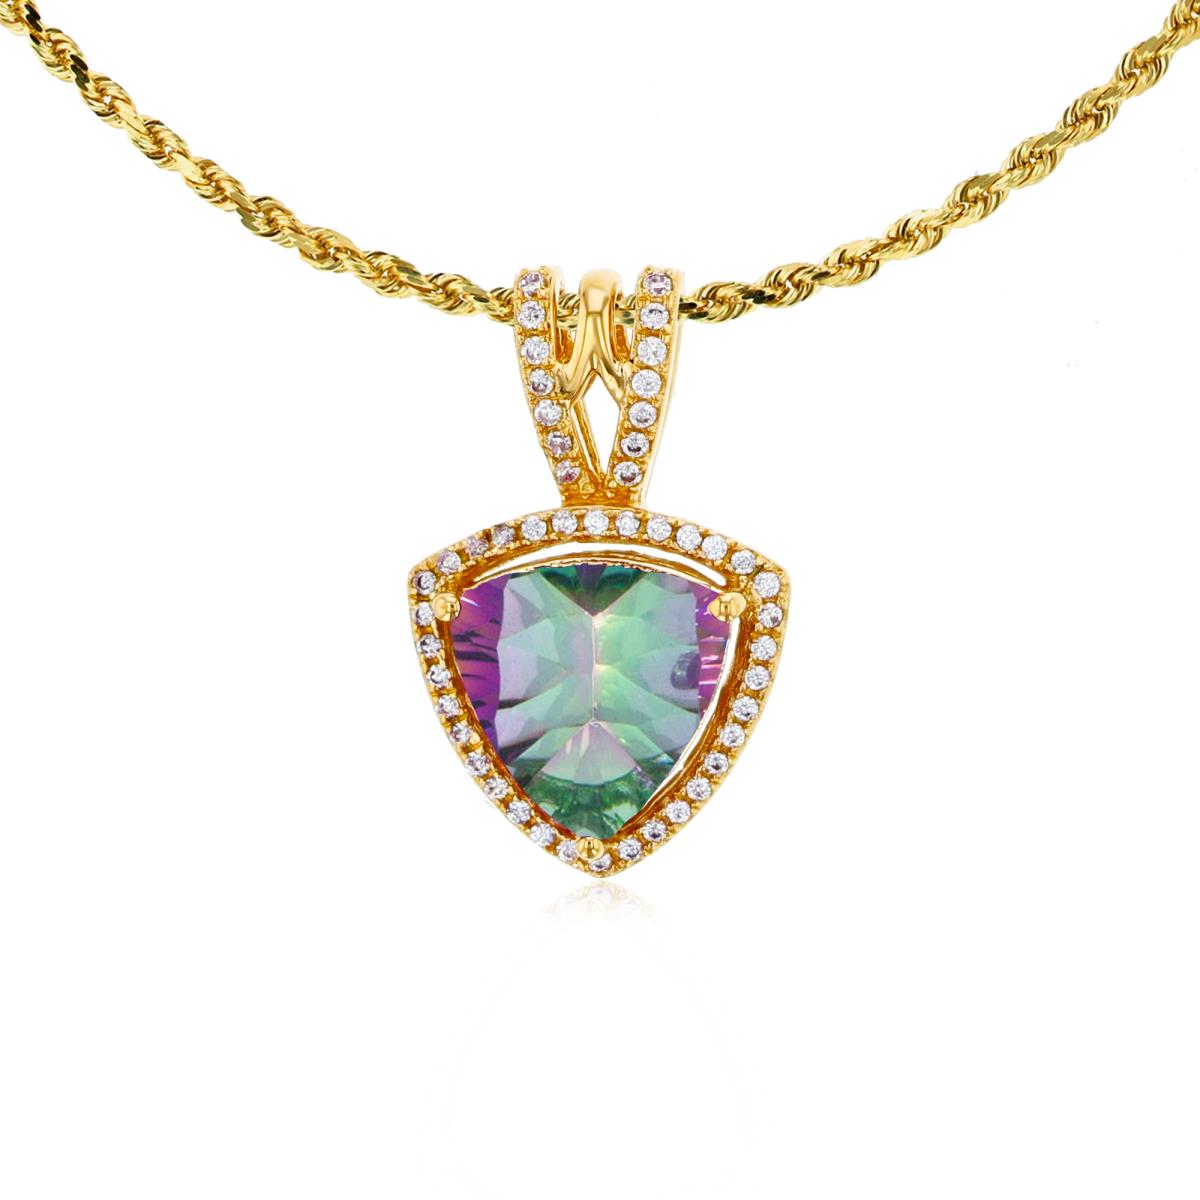 14K Yellow Gold 8mm Trillion Mystic Green Topaz & 0.13 CTTW Diamonds Frame 18" Rope Chain Necklace